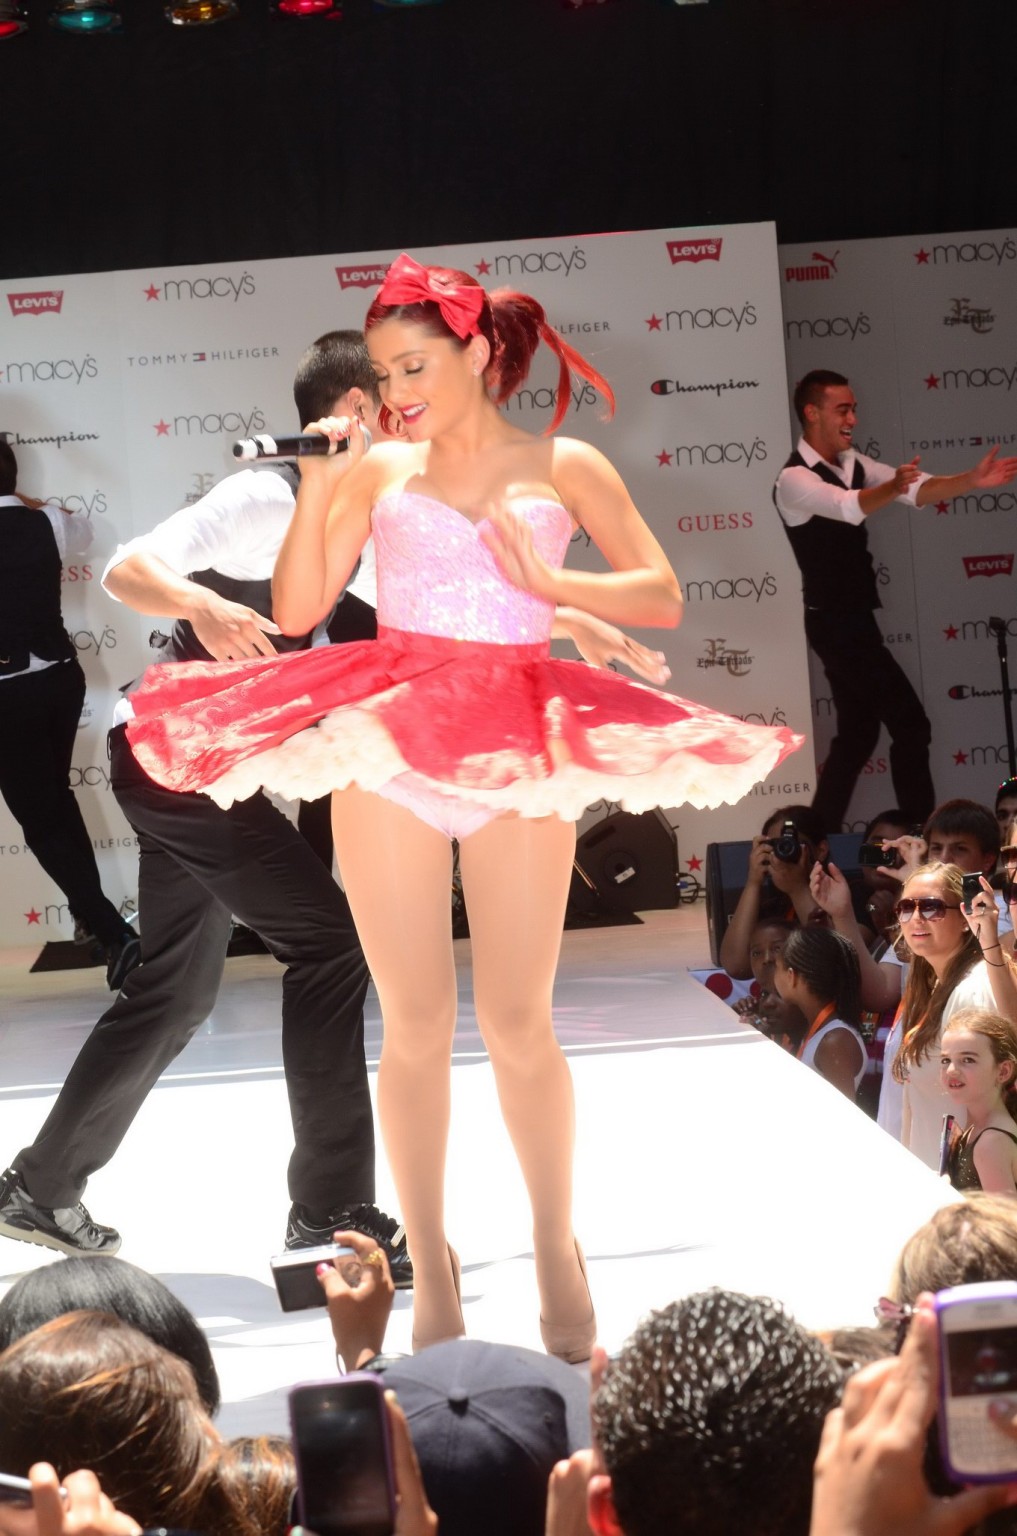 Ariana Grande flashing her panties at Macy's Annual Summer Blowout Show in NYC #75286868